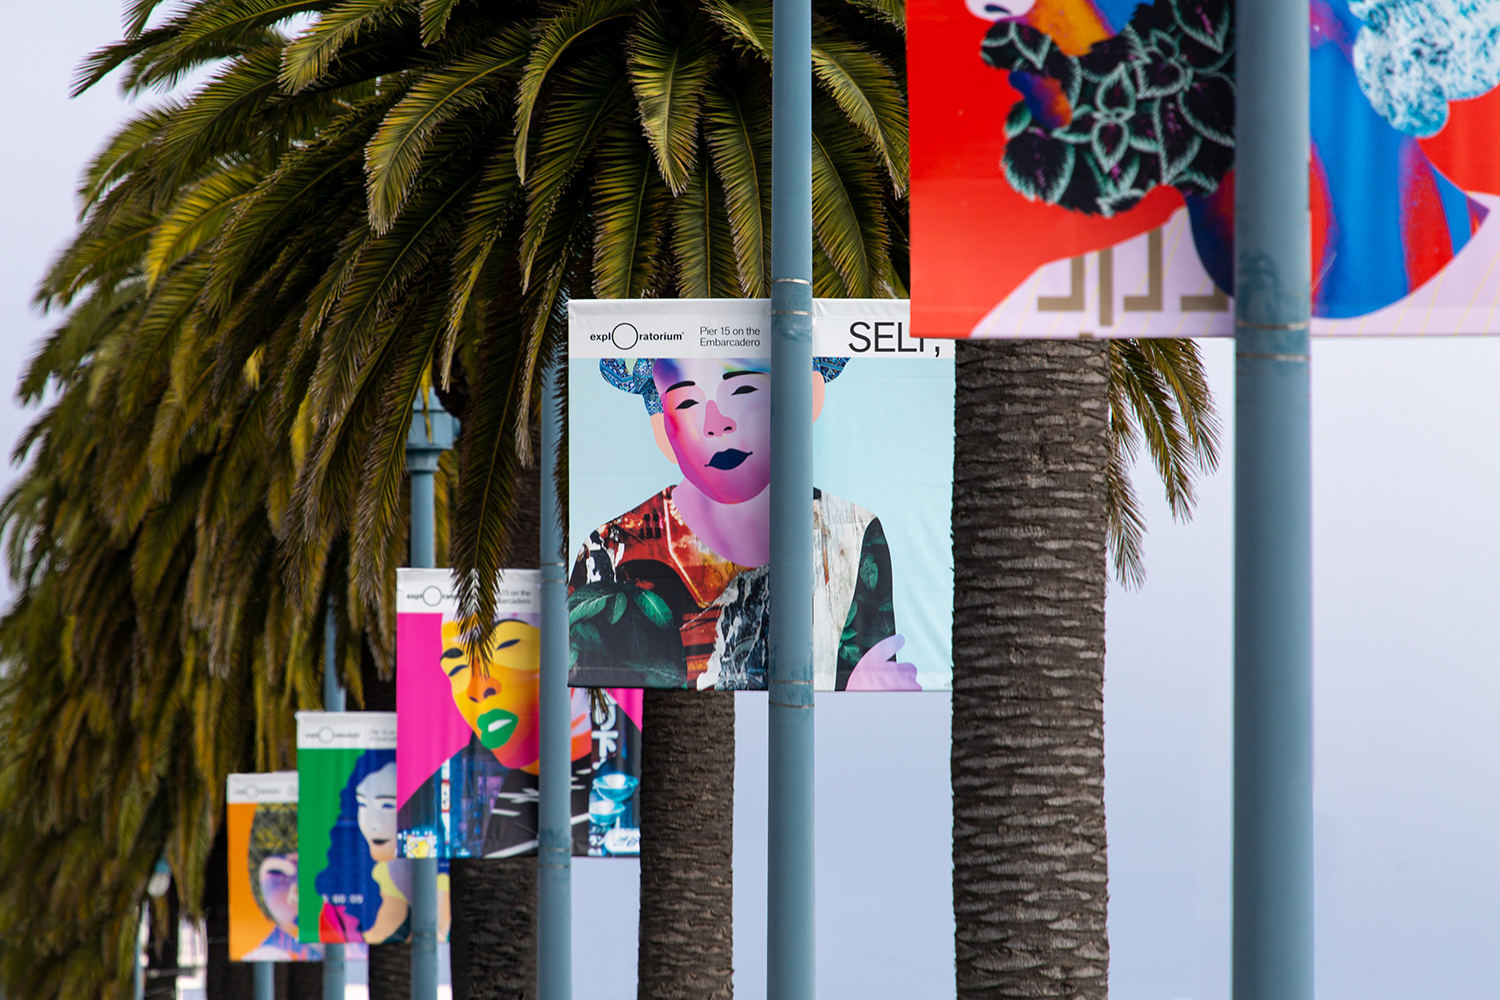 Campaign designed by Collins for Exploratorium's summer 2019 exhibition Self, Made